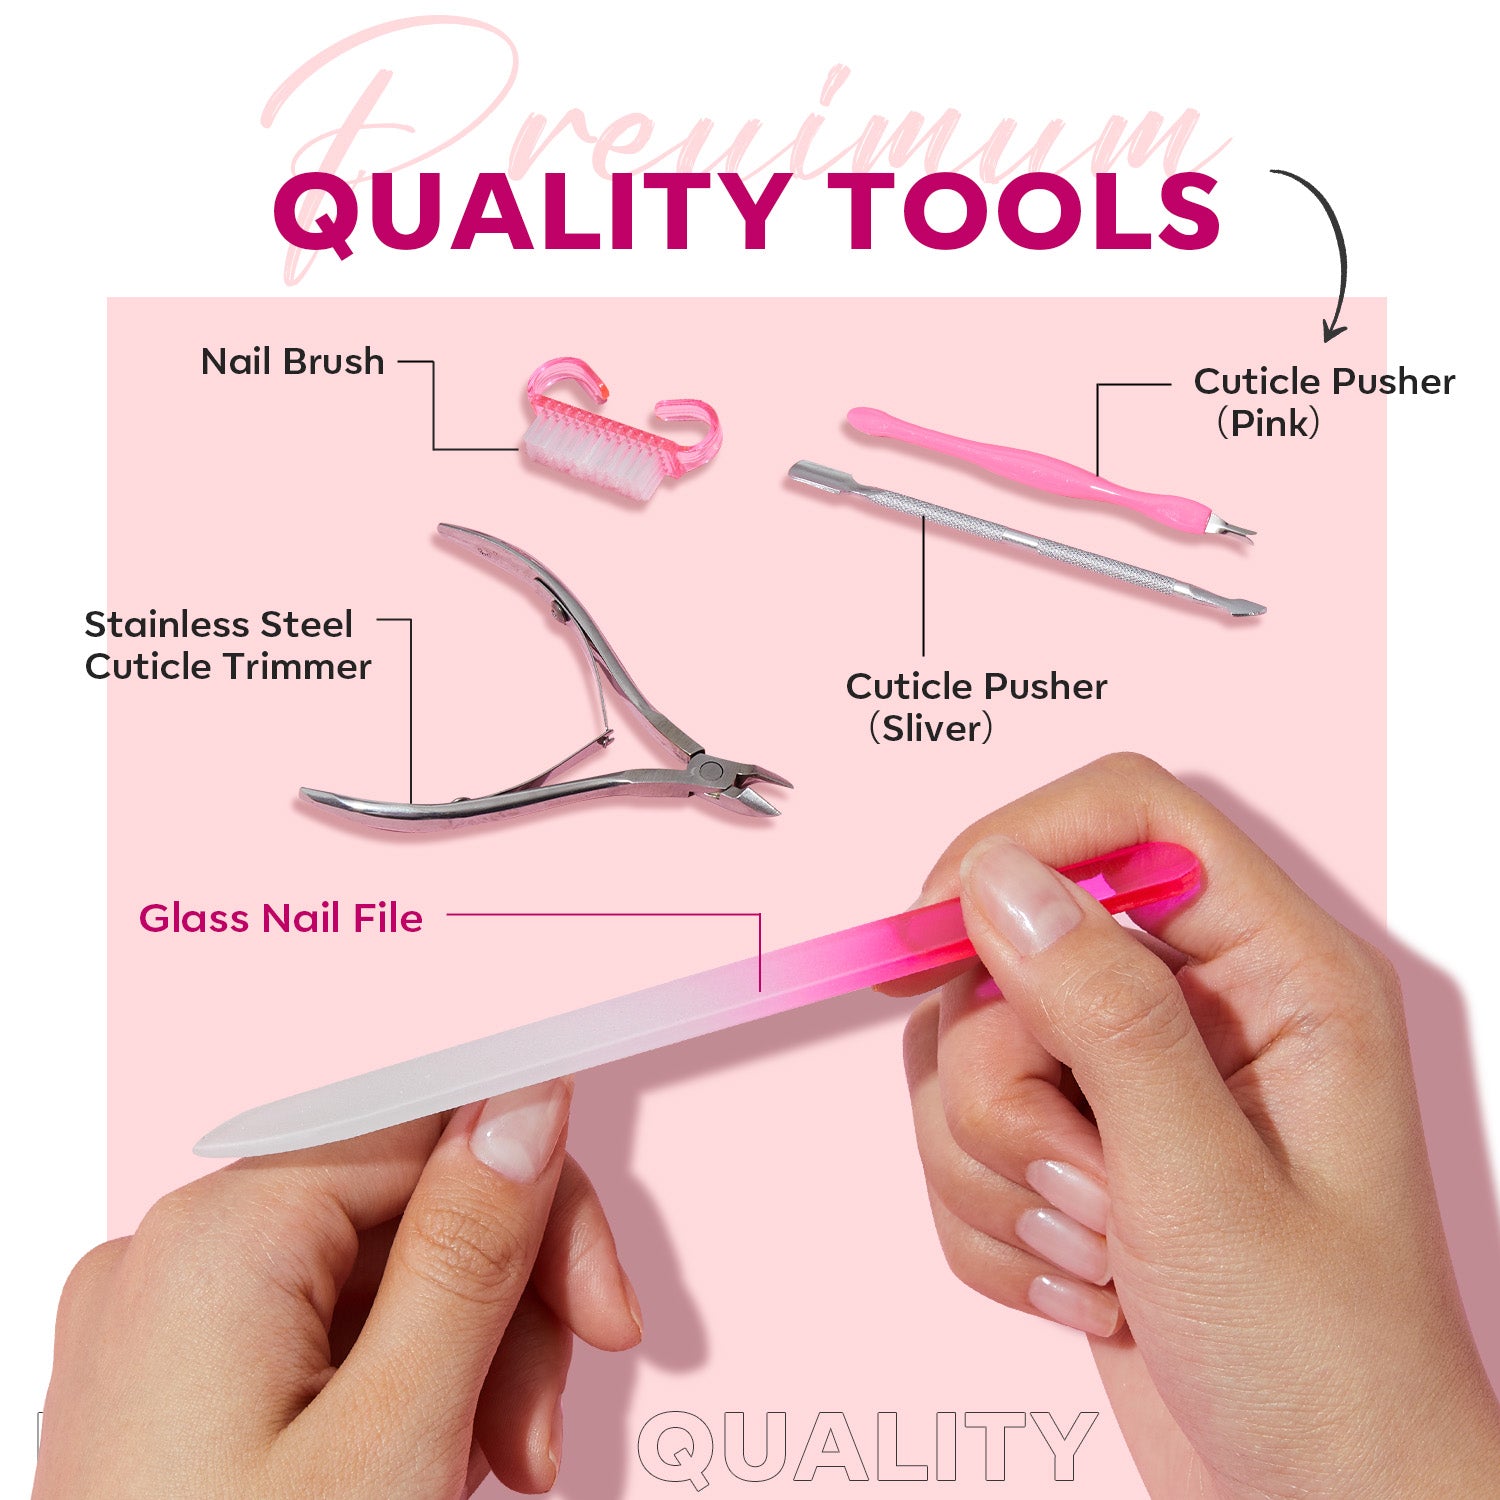 Modelones All-in-one Cuticle Remover Kit for Nail Care